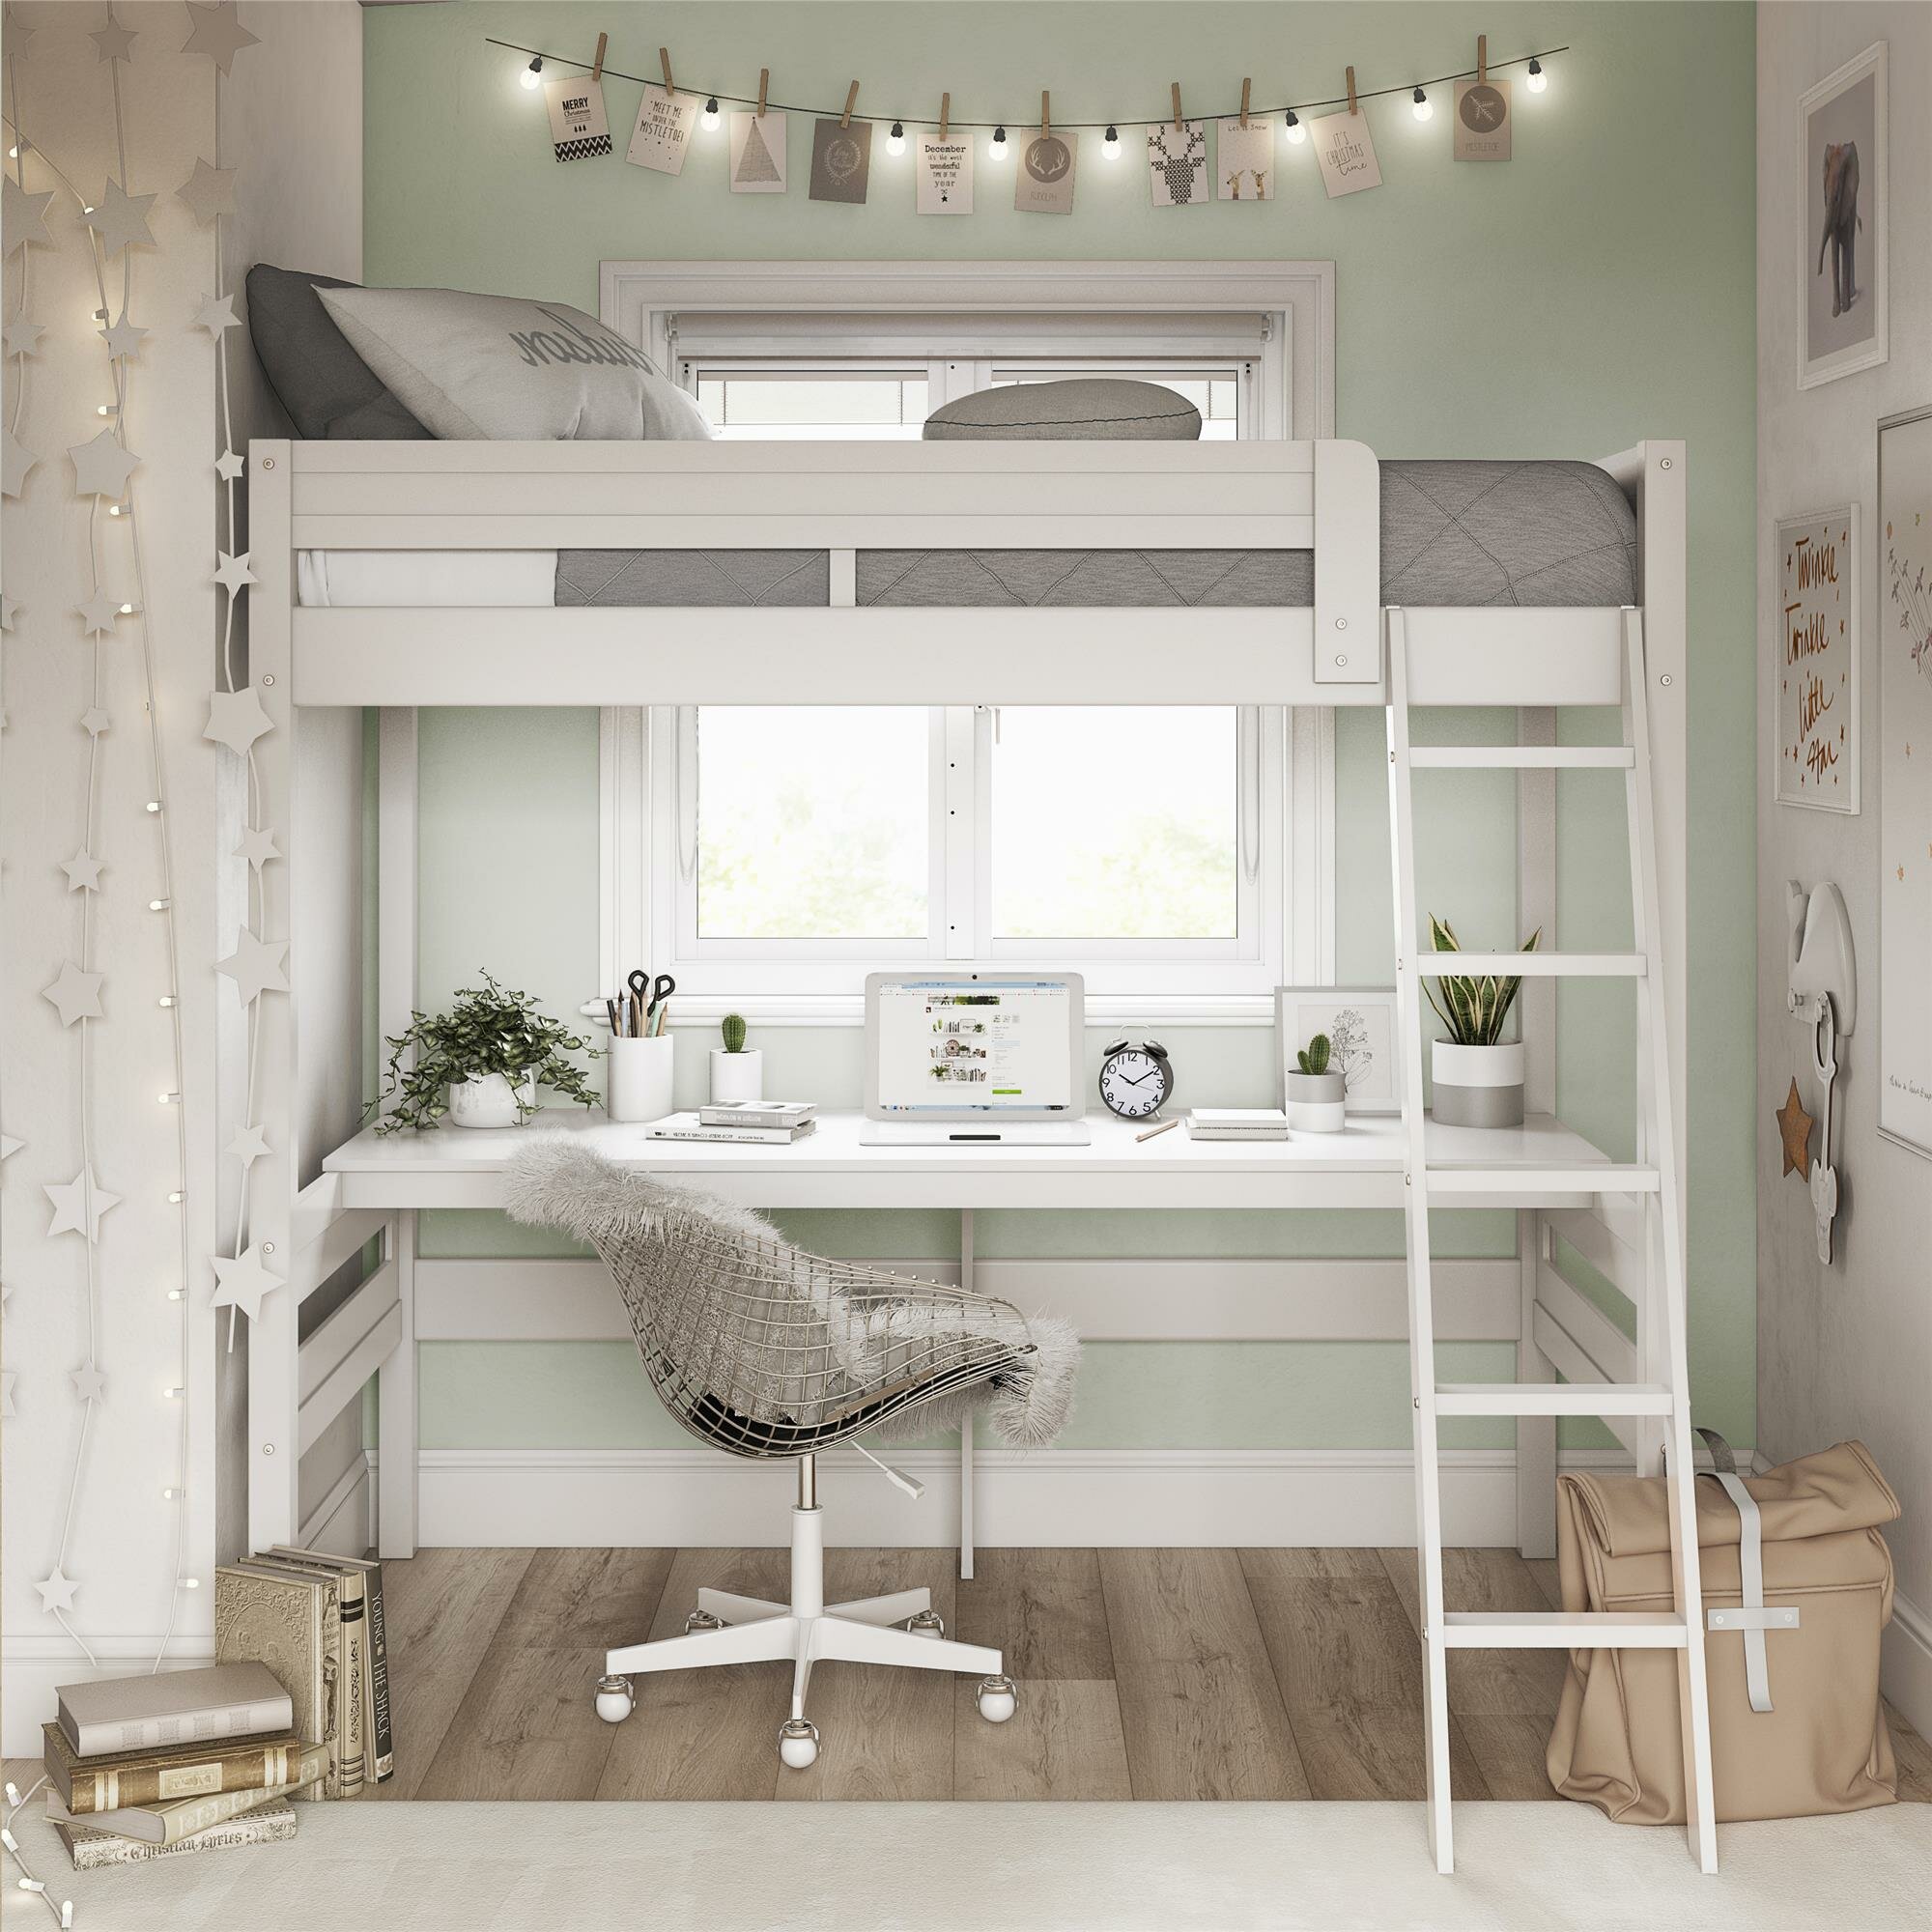 loft bed with desk double